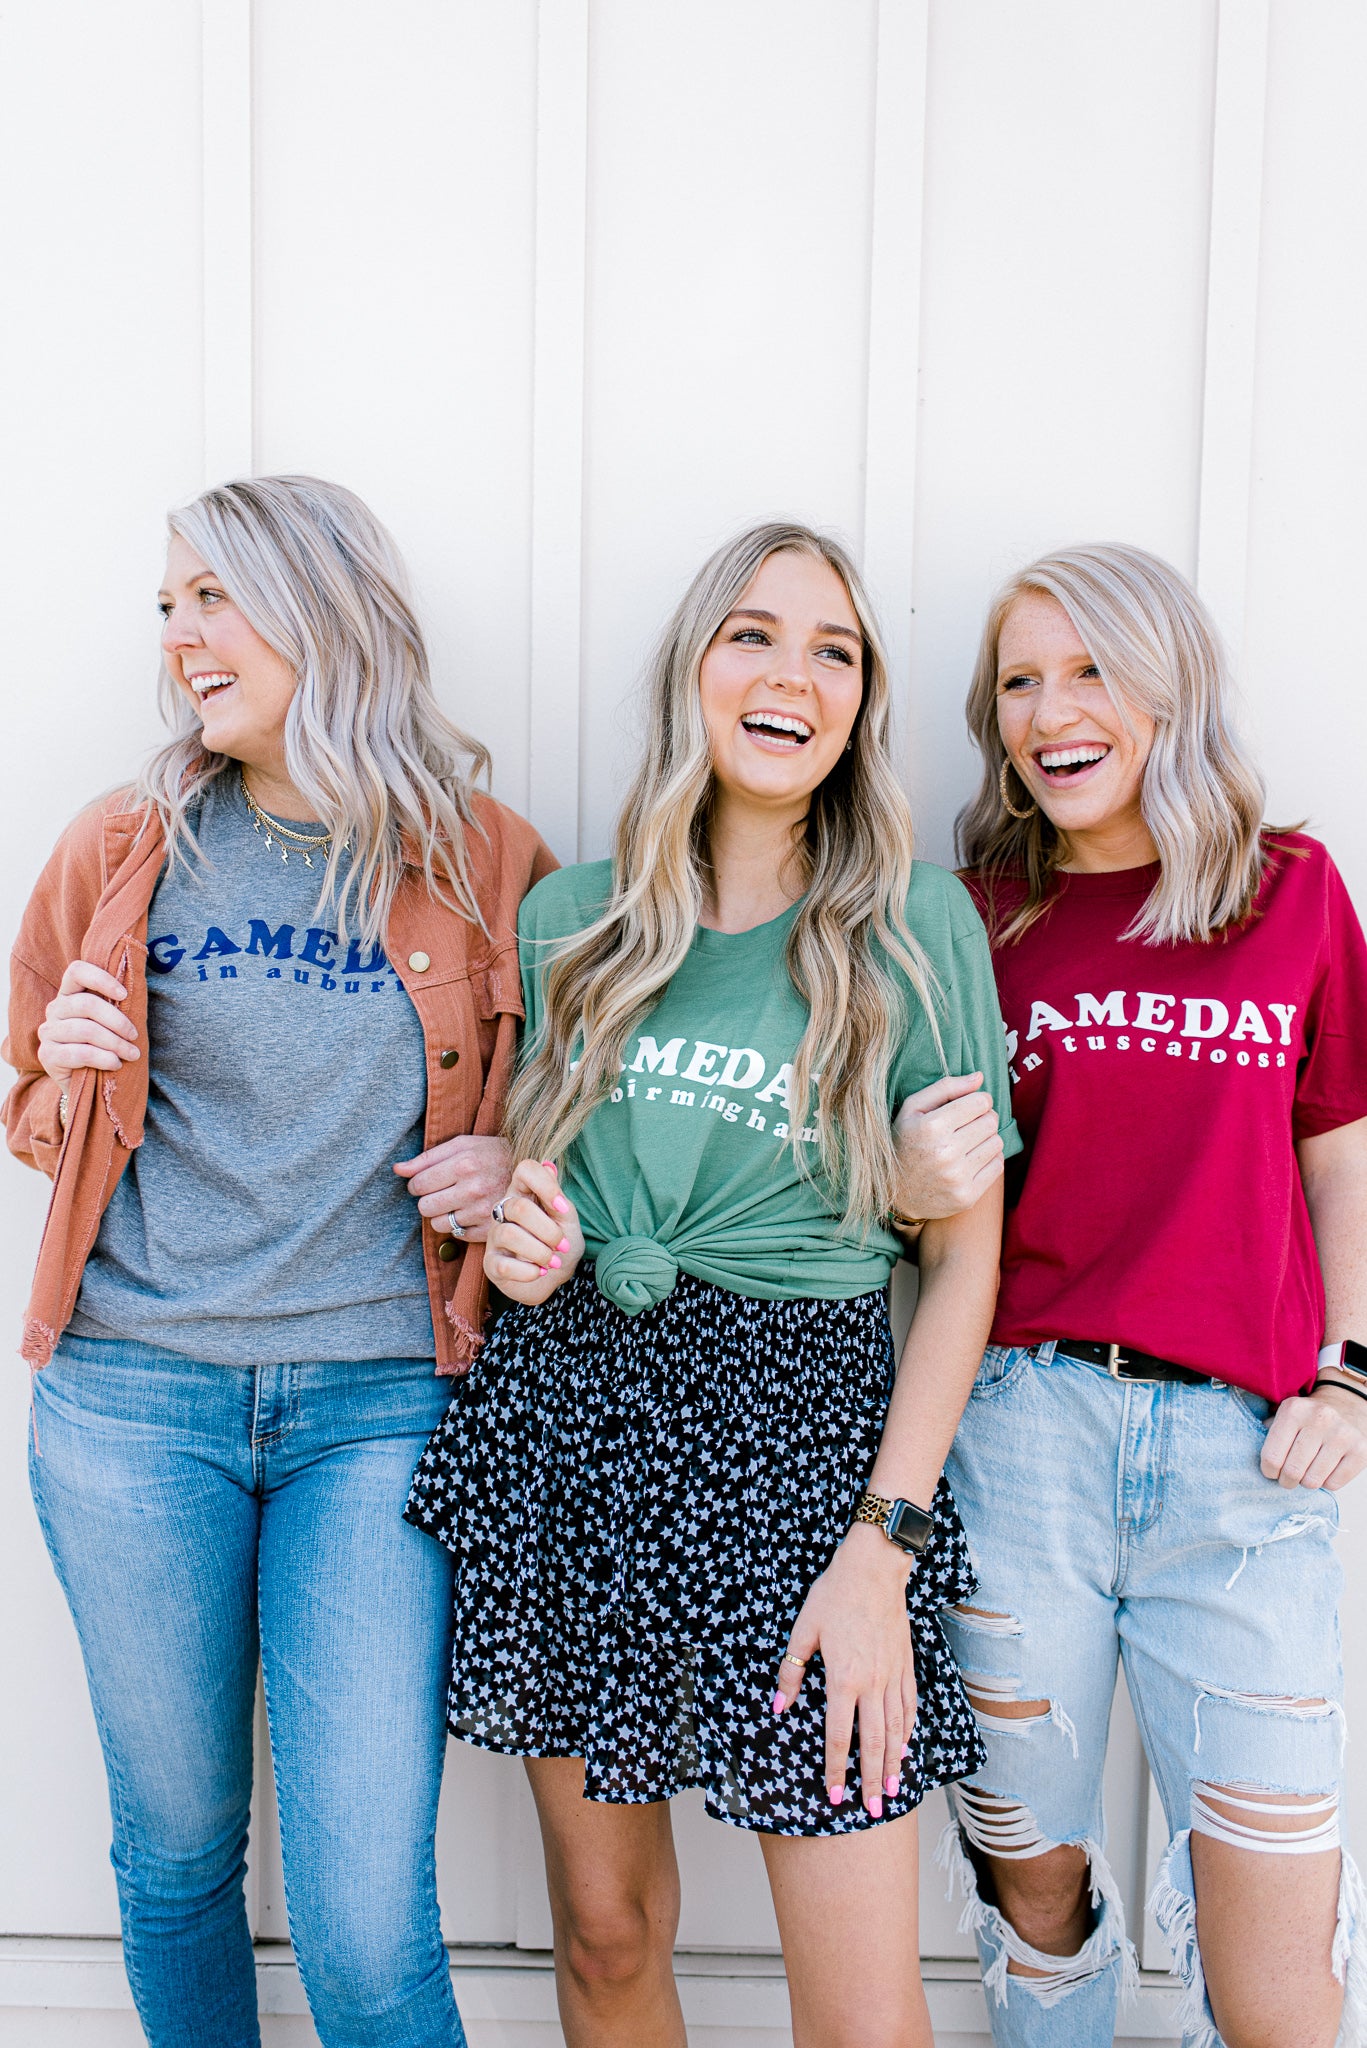 Load image into Gallery viewer, Gameday in Trussville | Adult Tee-Adult Tee-Sister Shirts-Sister Shirts, Cute &amp;amp; Custom Tees for Mama &amp;amp; Littles in Trussville, Alabama.
